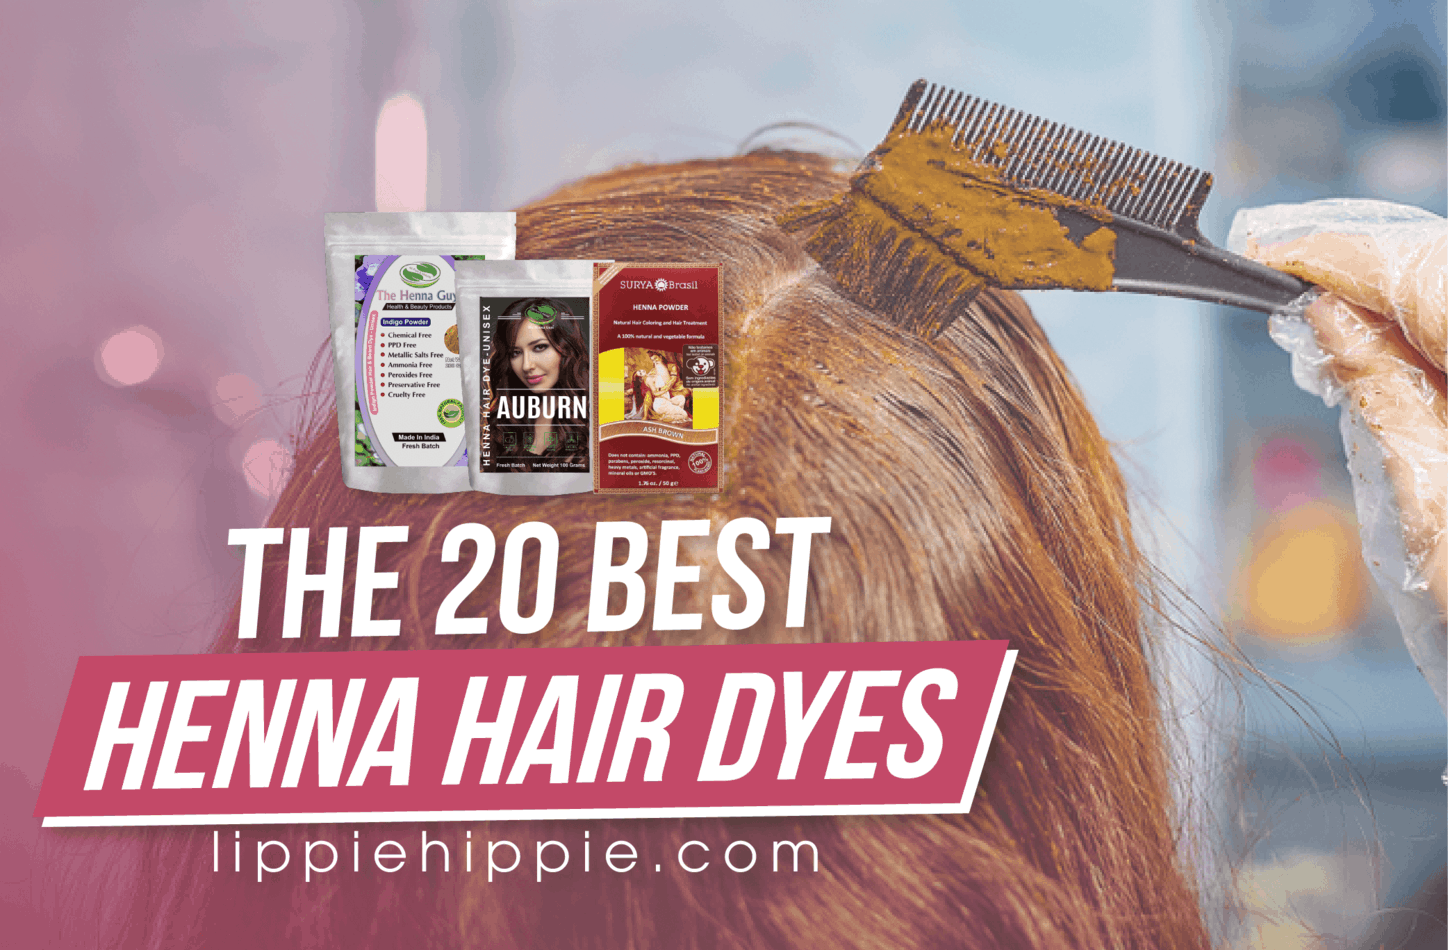 7. How to Maintain Vibrant Jet Blue Hair with the Best Dye Products - wide 6